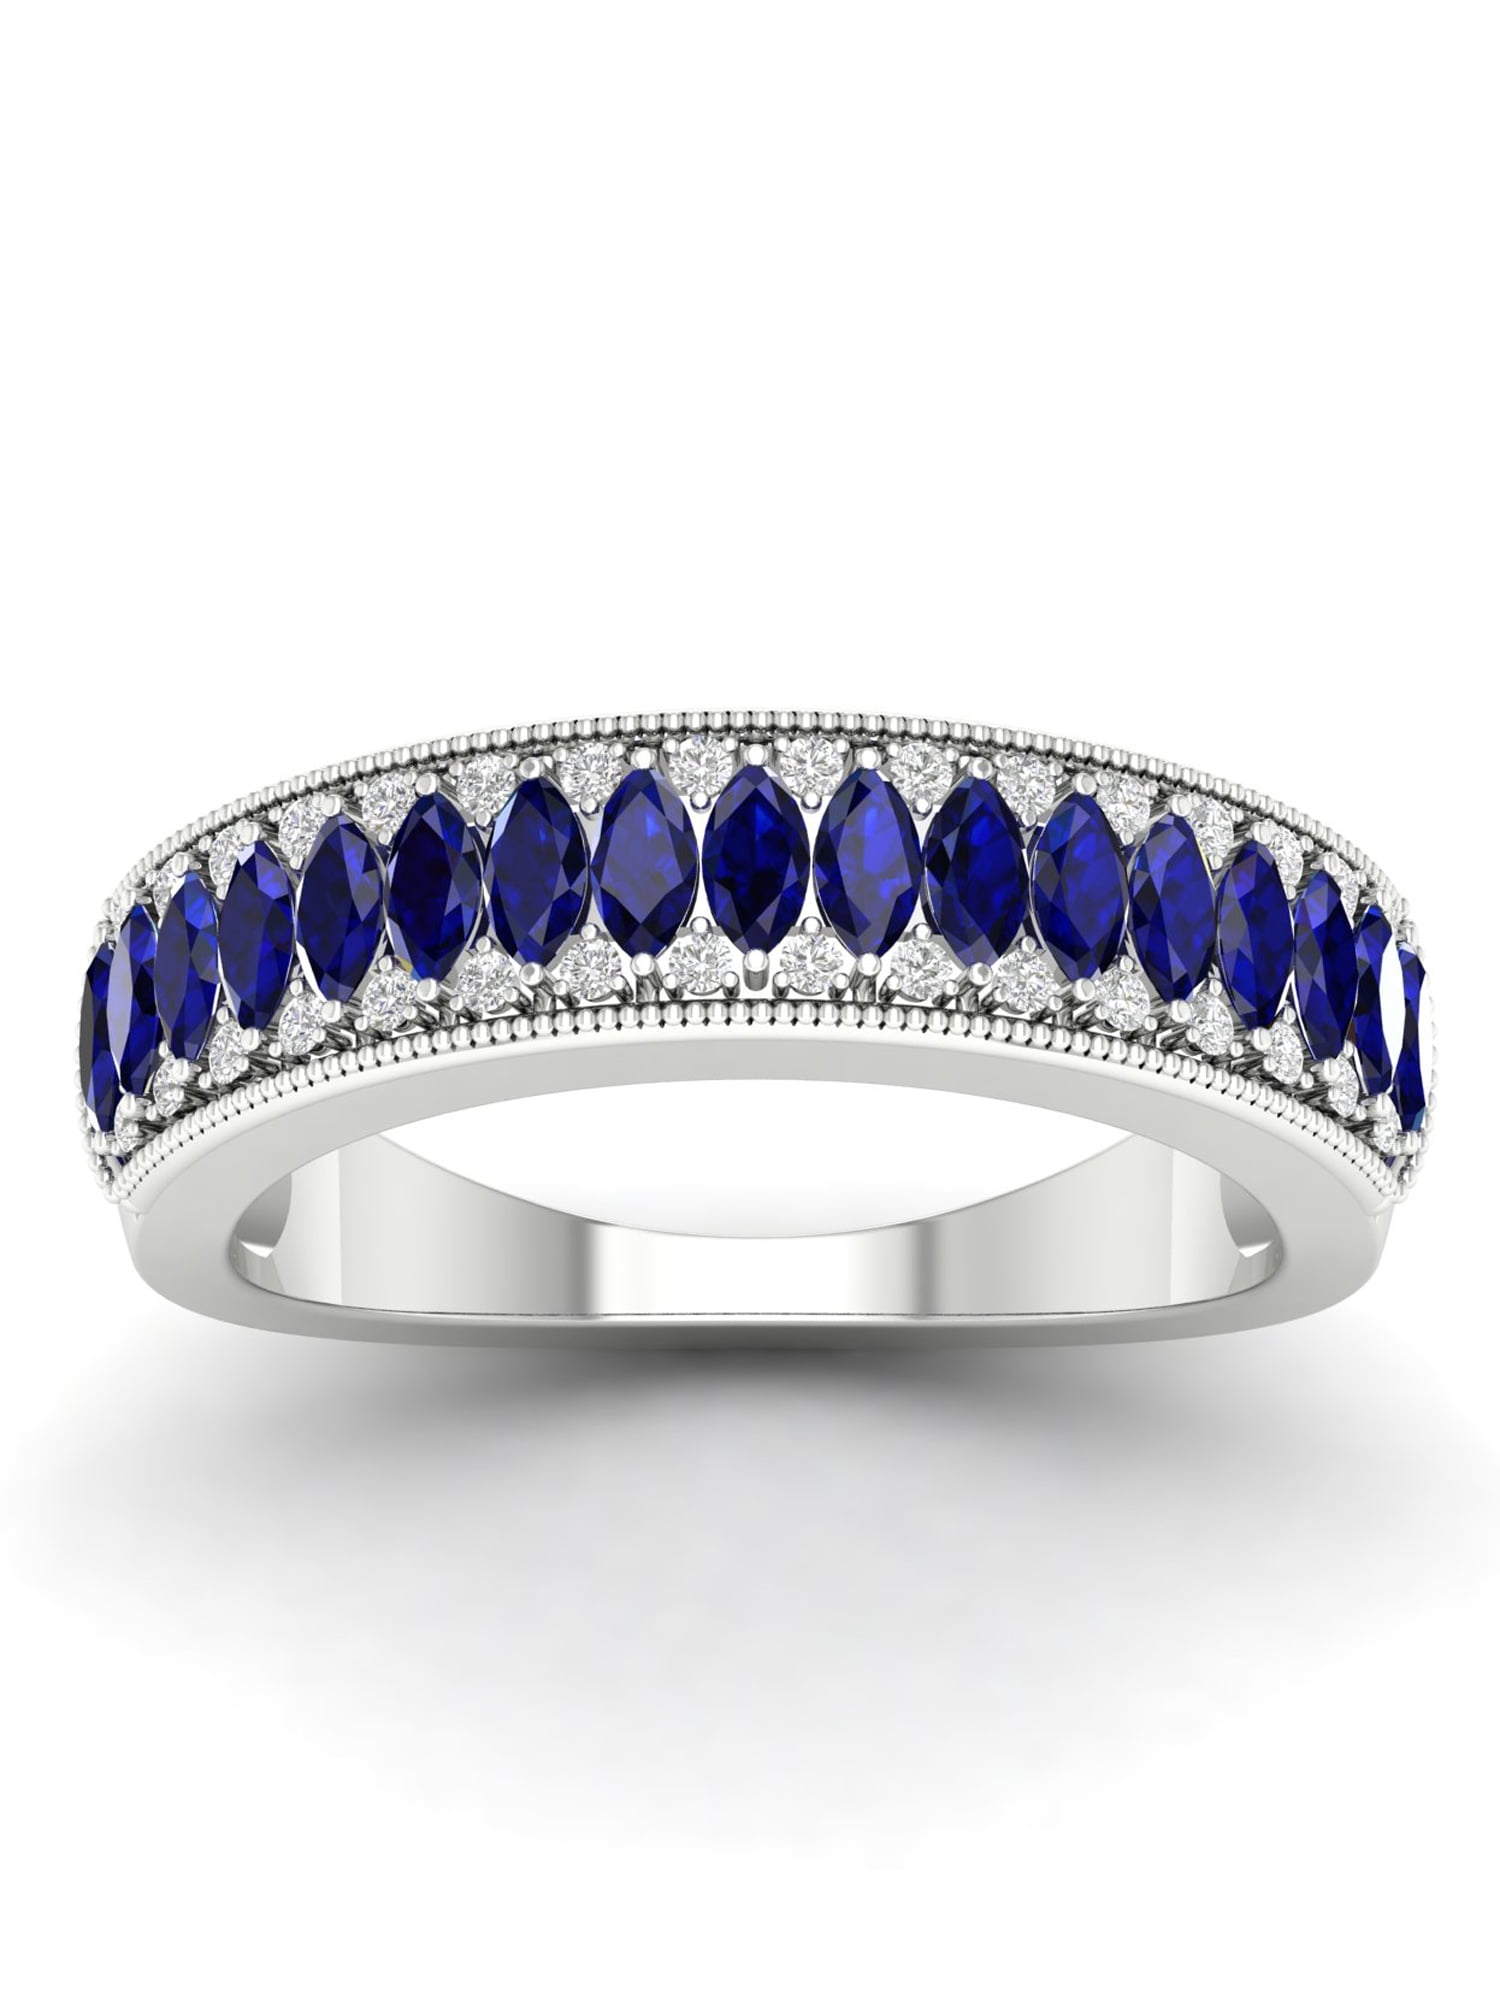 2.20 cttw Round Cut Available 5,6,7,8,9 Gem Stone King Sterling Silver Blue and White Created Sapphire Women's Eternity Wedding Band Ring 